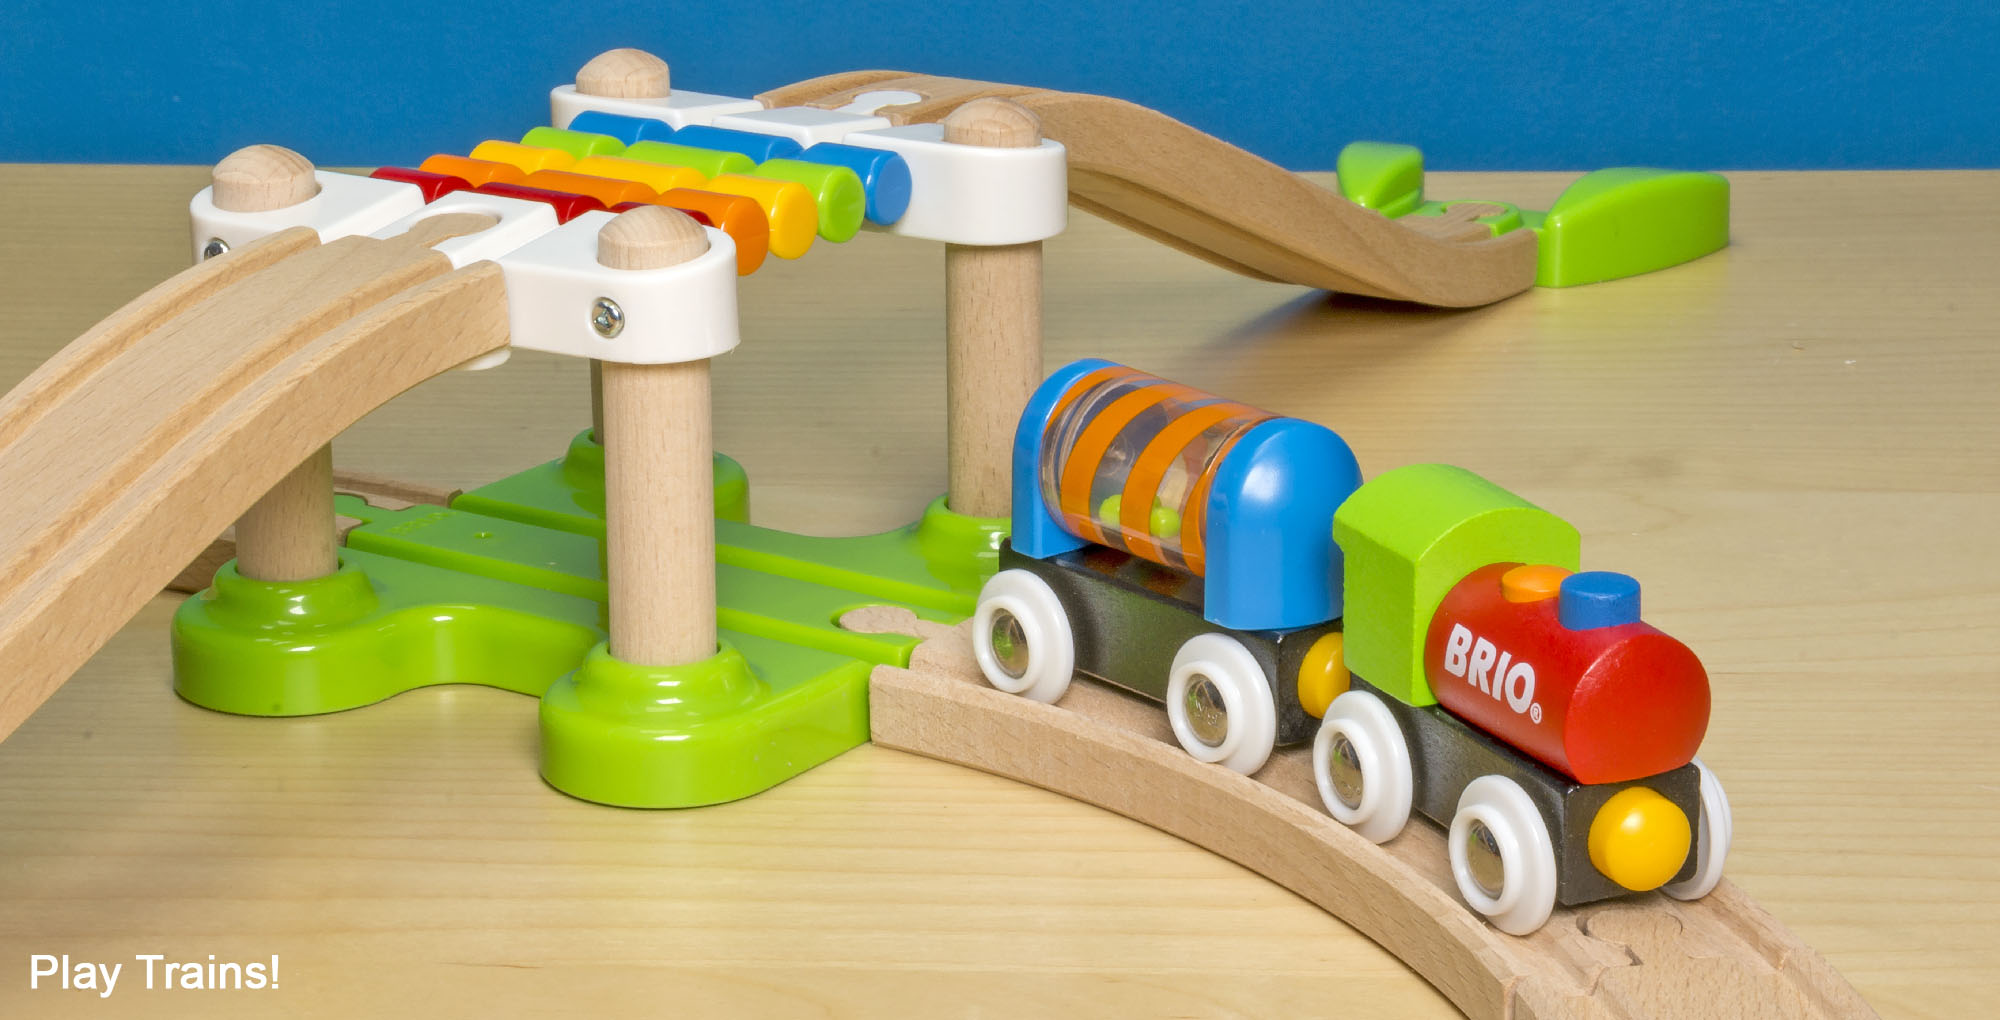 BRIO My First Railway Beginner Pack Train Set -- The Play Trains! Guide to Wooden Train Sets: expert advice on the best wooden train set to buy for your little engineer.